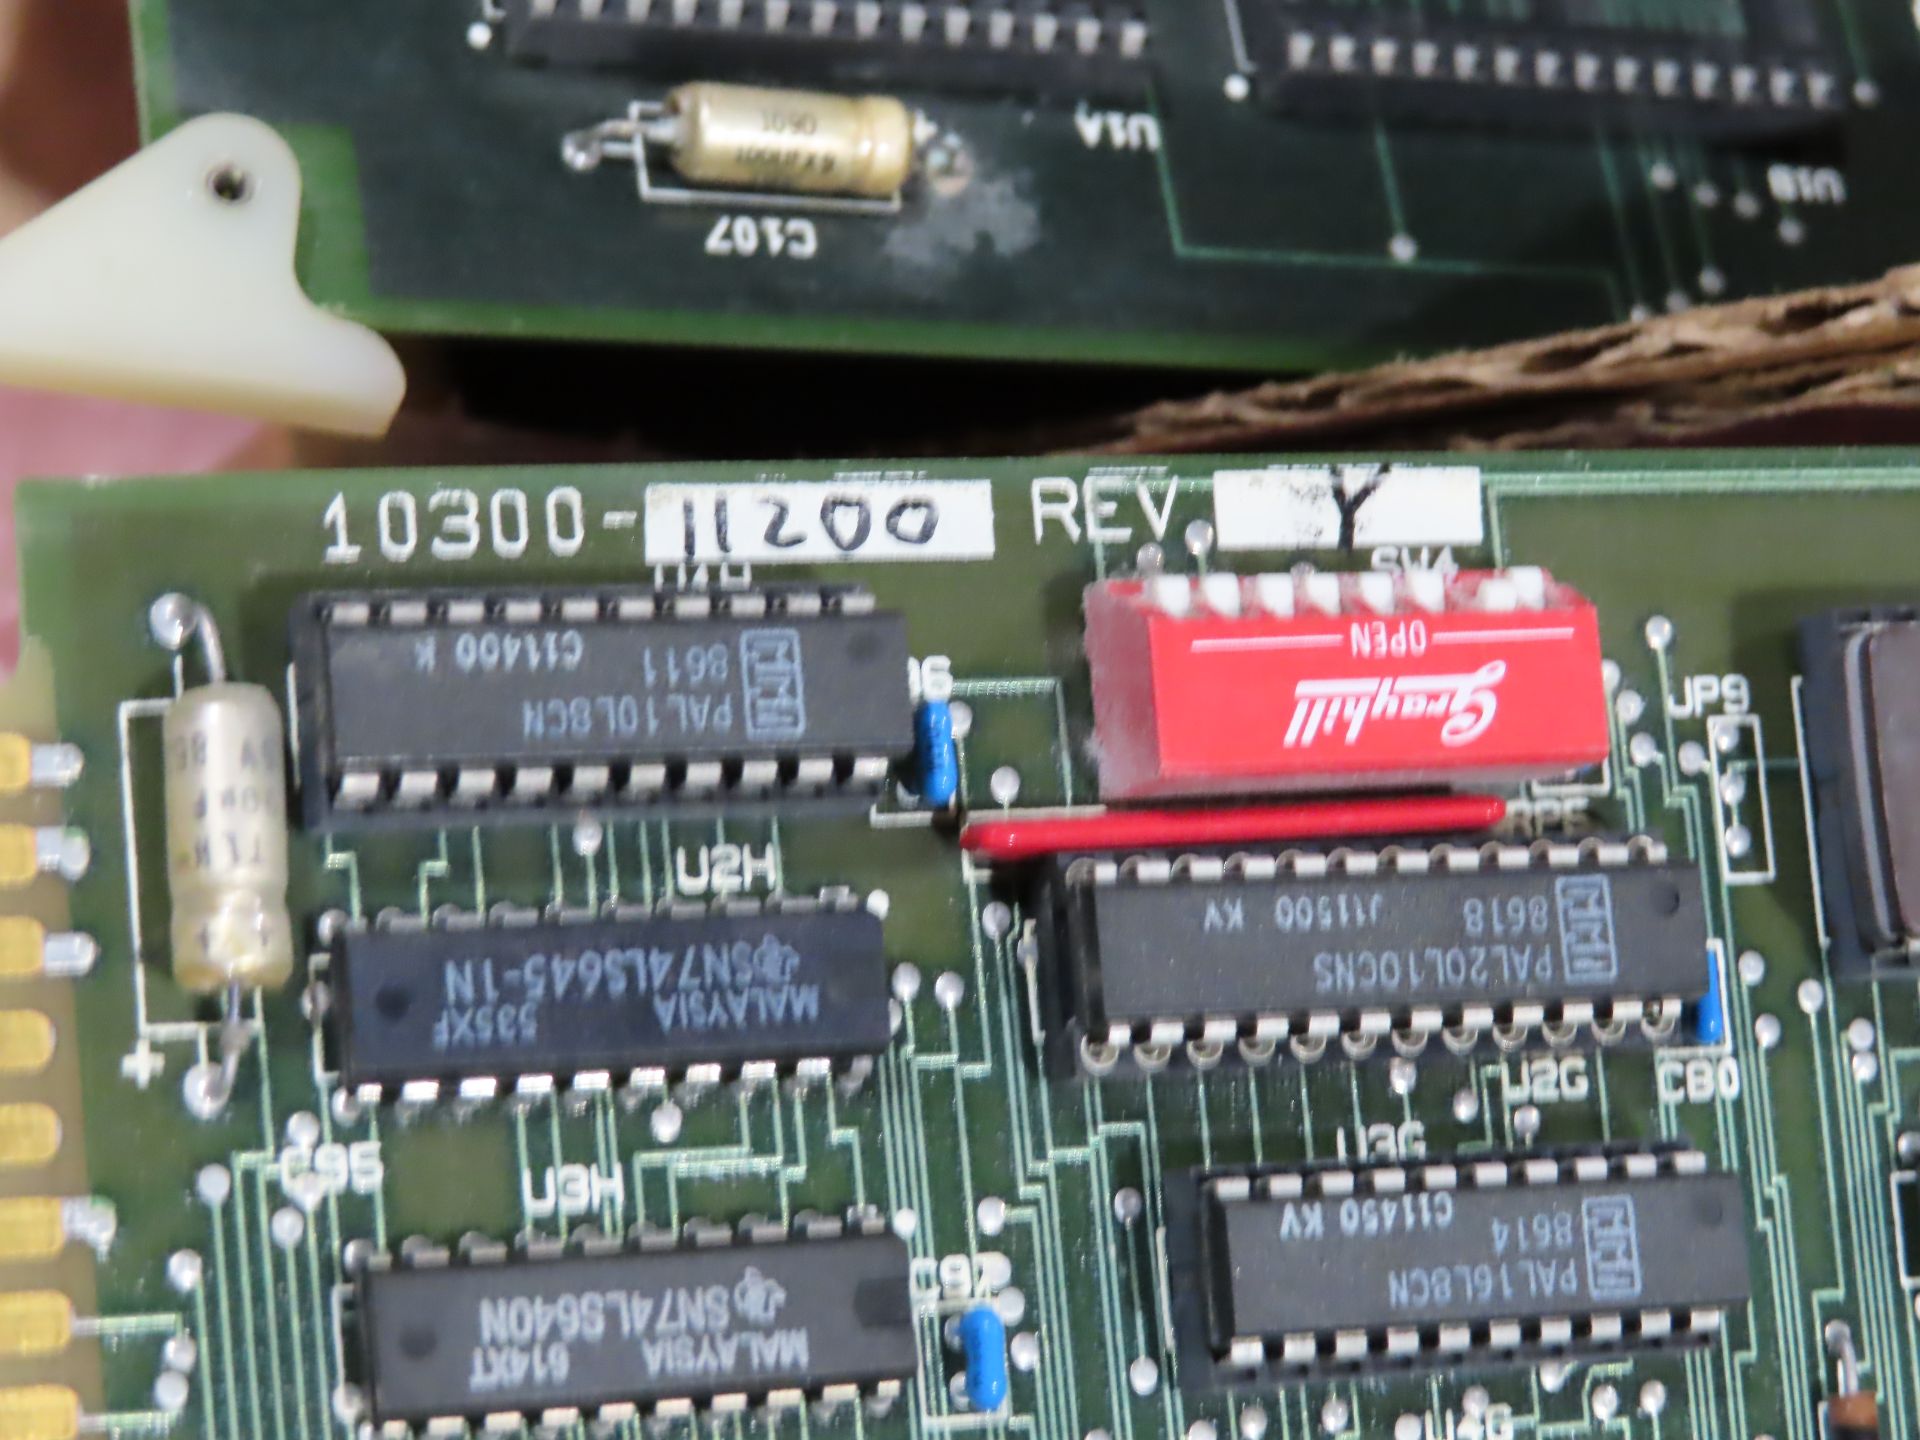 Qty 2 Adept 10300-11200 Rev Y, joint interface board, as always, with Brolyn LLC auctions, all lots - Image 2 of 2